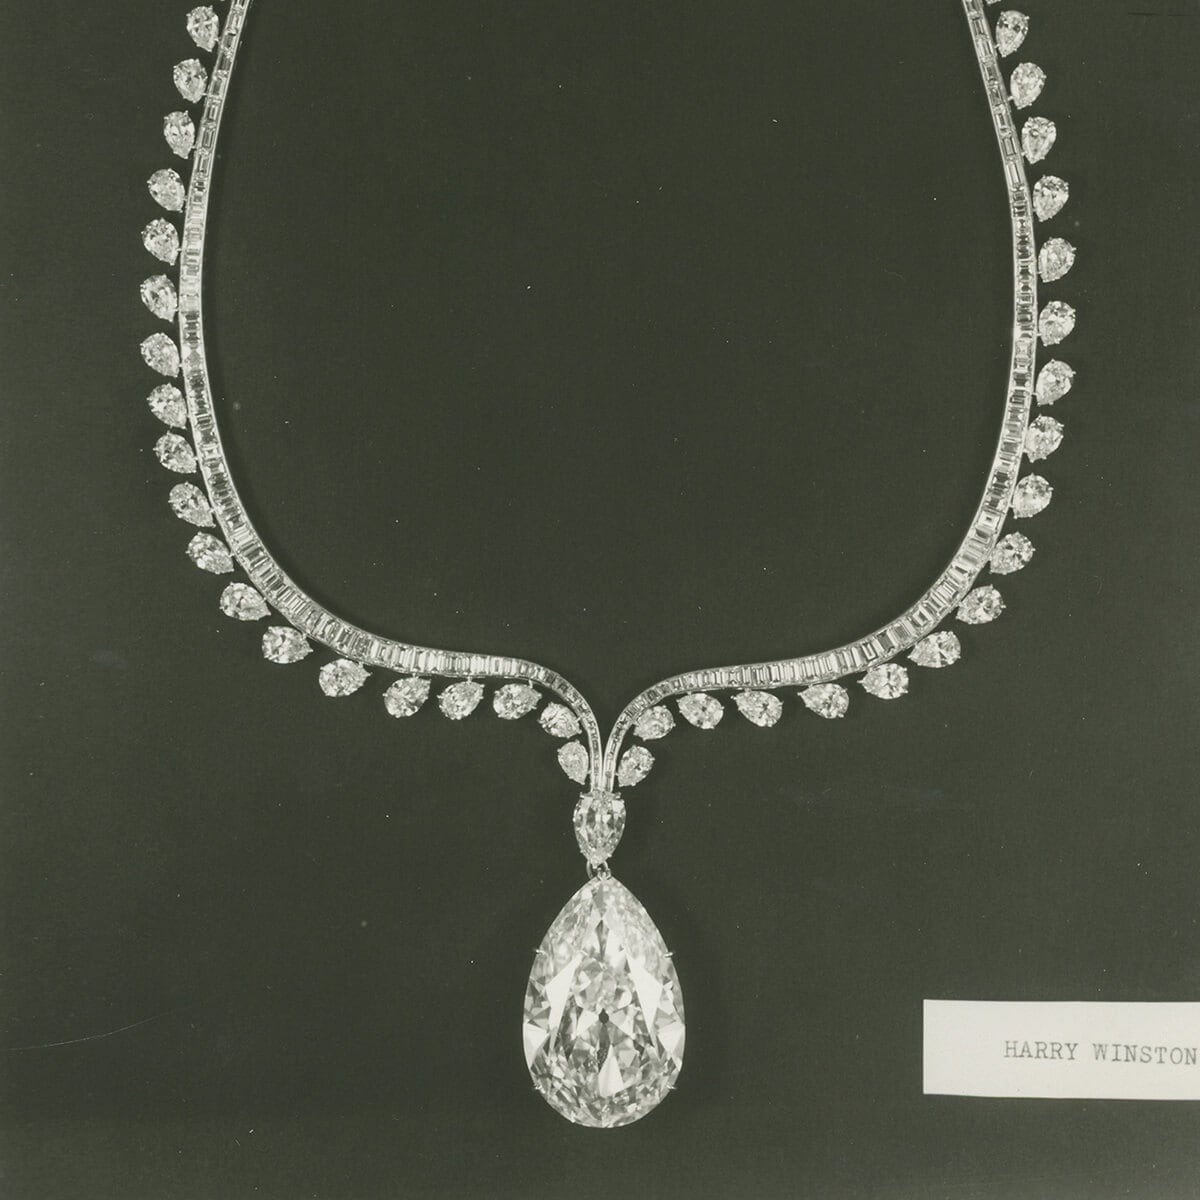 Black and white image of The Winston Diamond set in a necklace